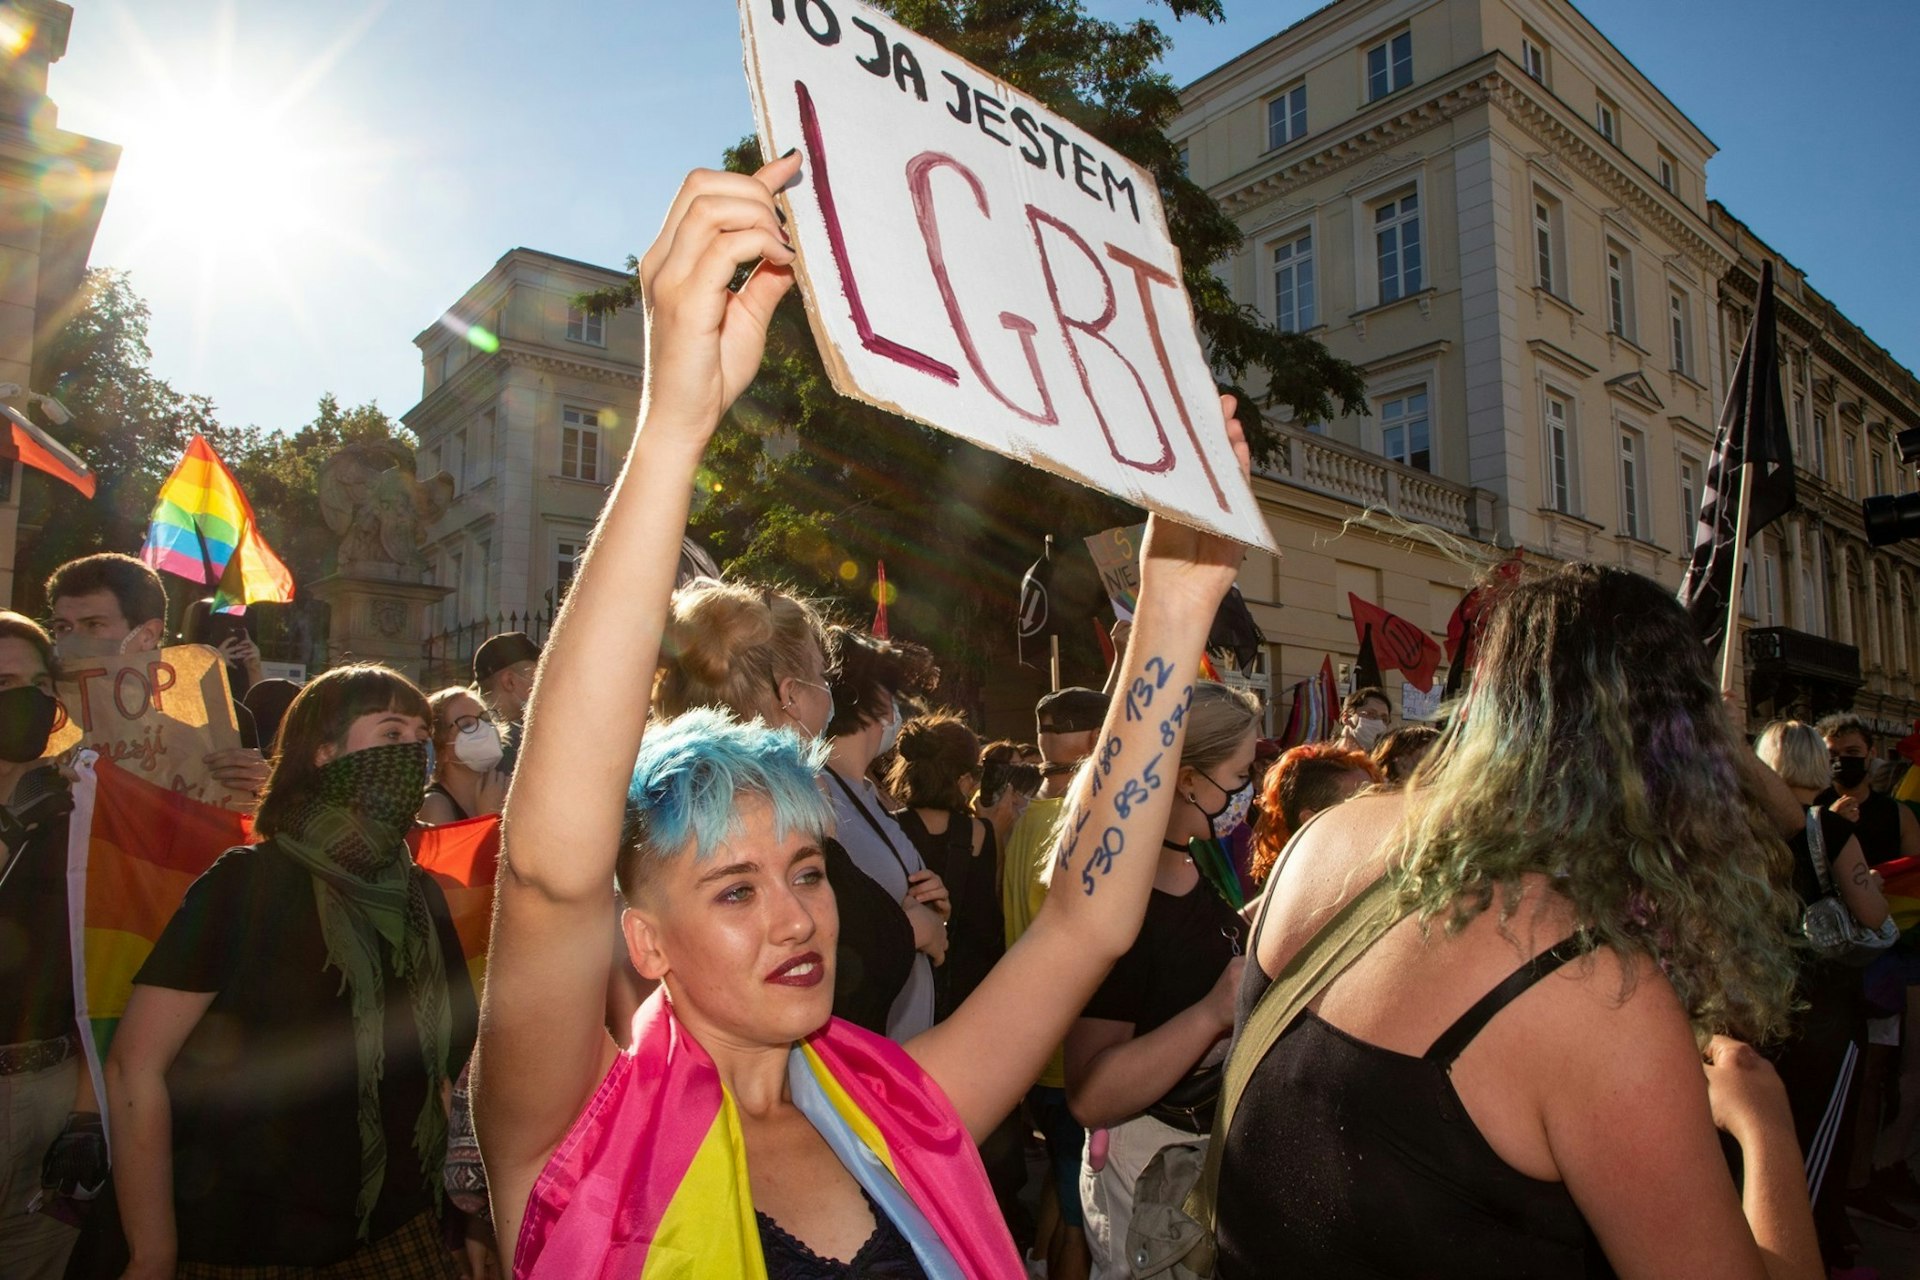 The activists taking on Poland's 'LGBT-free zones'